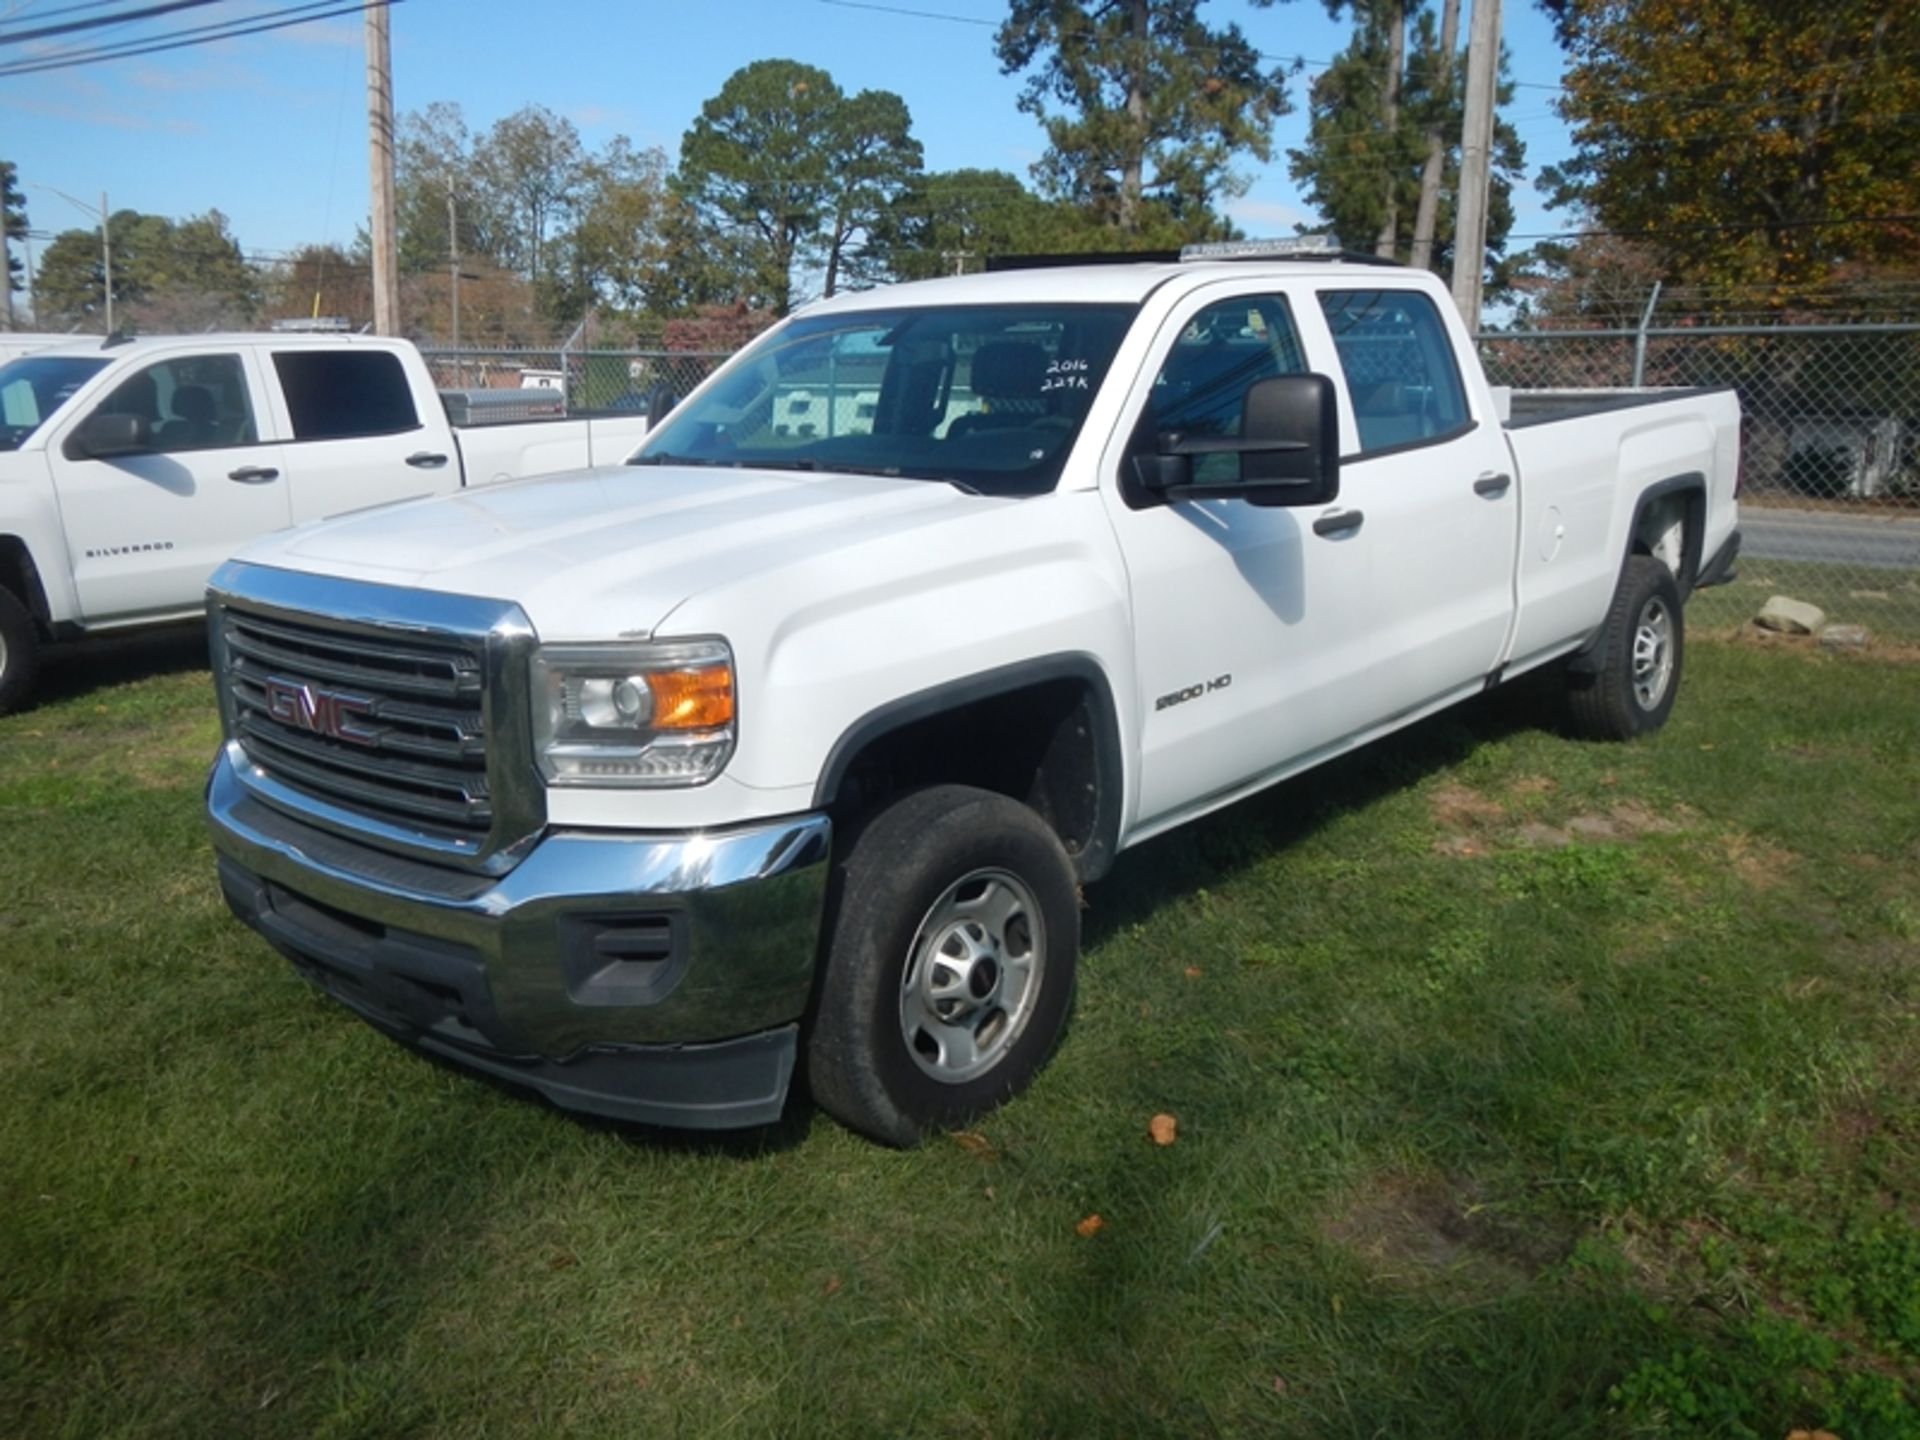 2016 GMC Sierra 2500 HD gas, crew cab, long bed, 2wd, work trim package - 229,709 miles showing -